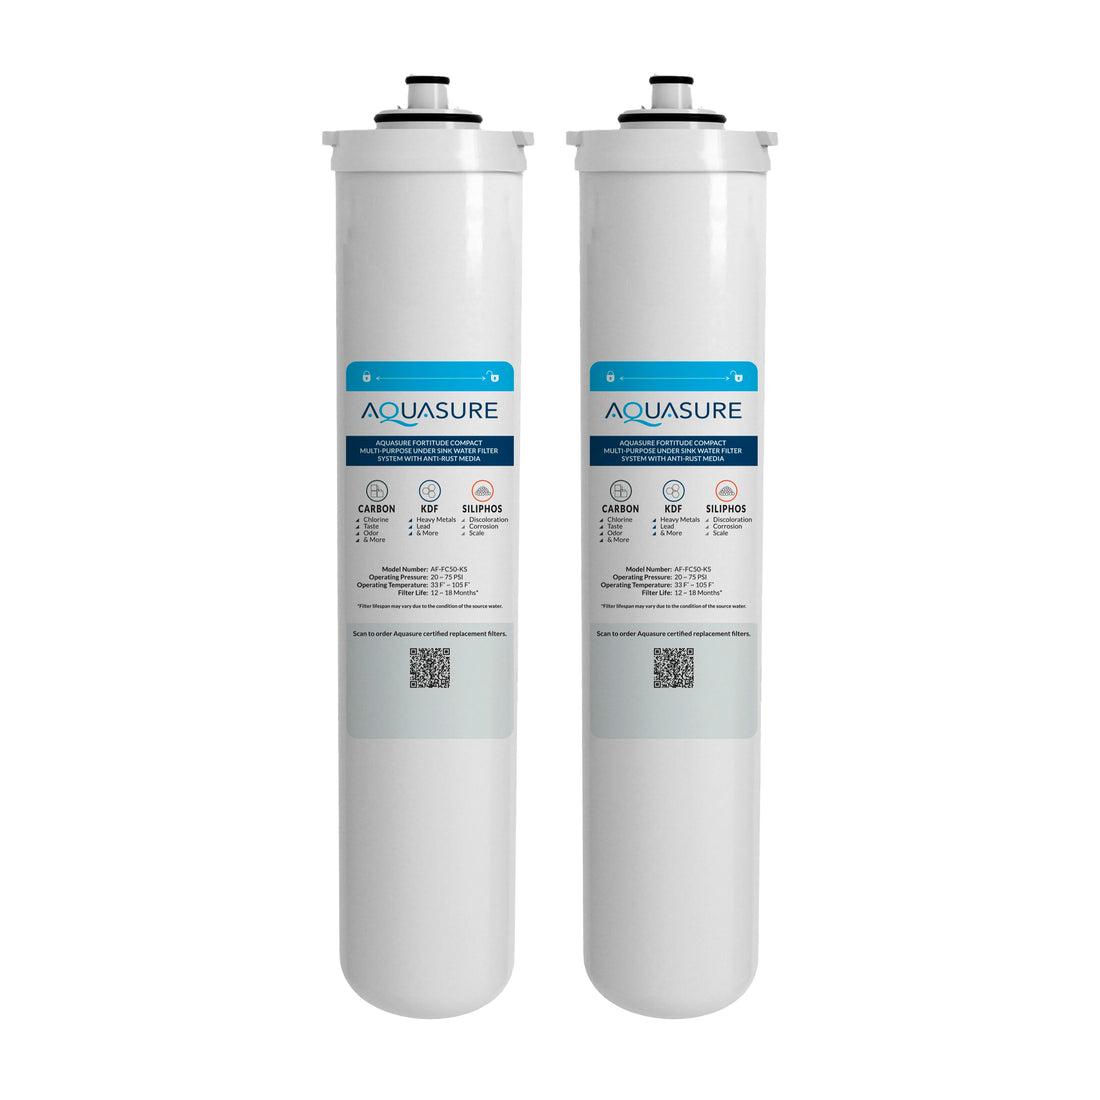 Aquasure Fortitude Compact Multi-Purpose Under Sink Water Filter System with Anti-Rust Media Replacement Filter (2-Pack)